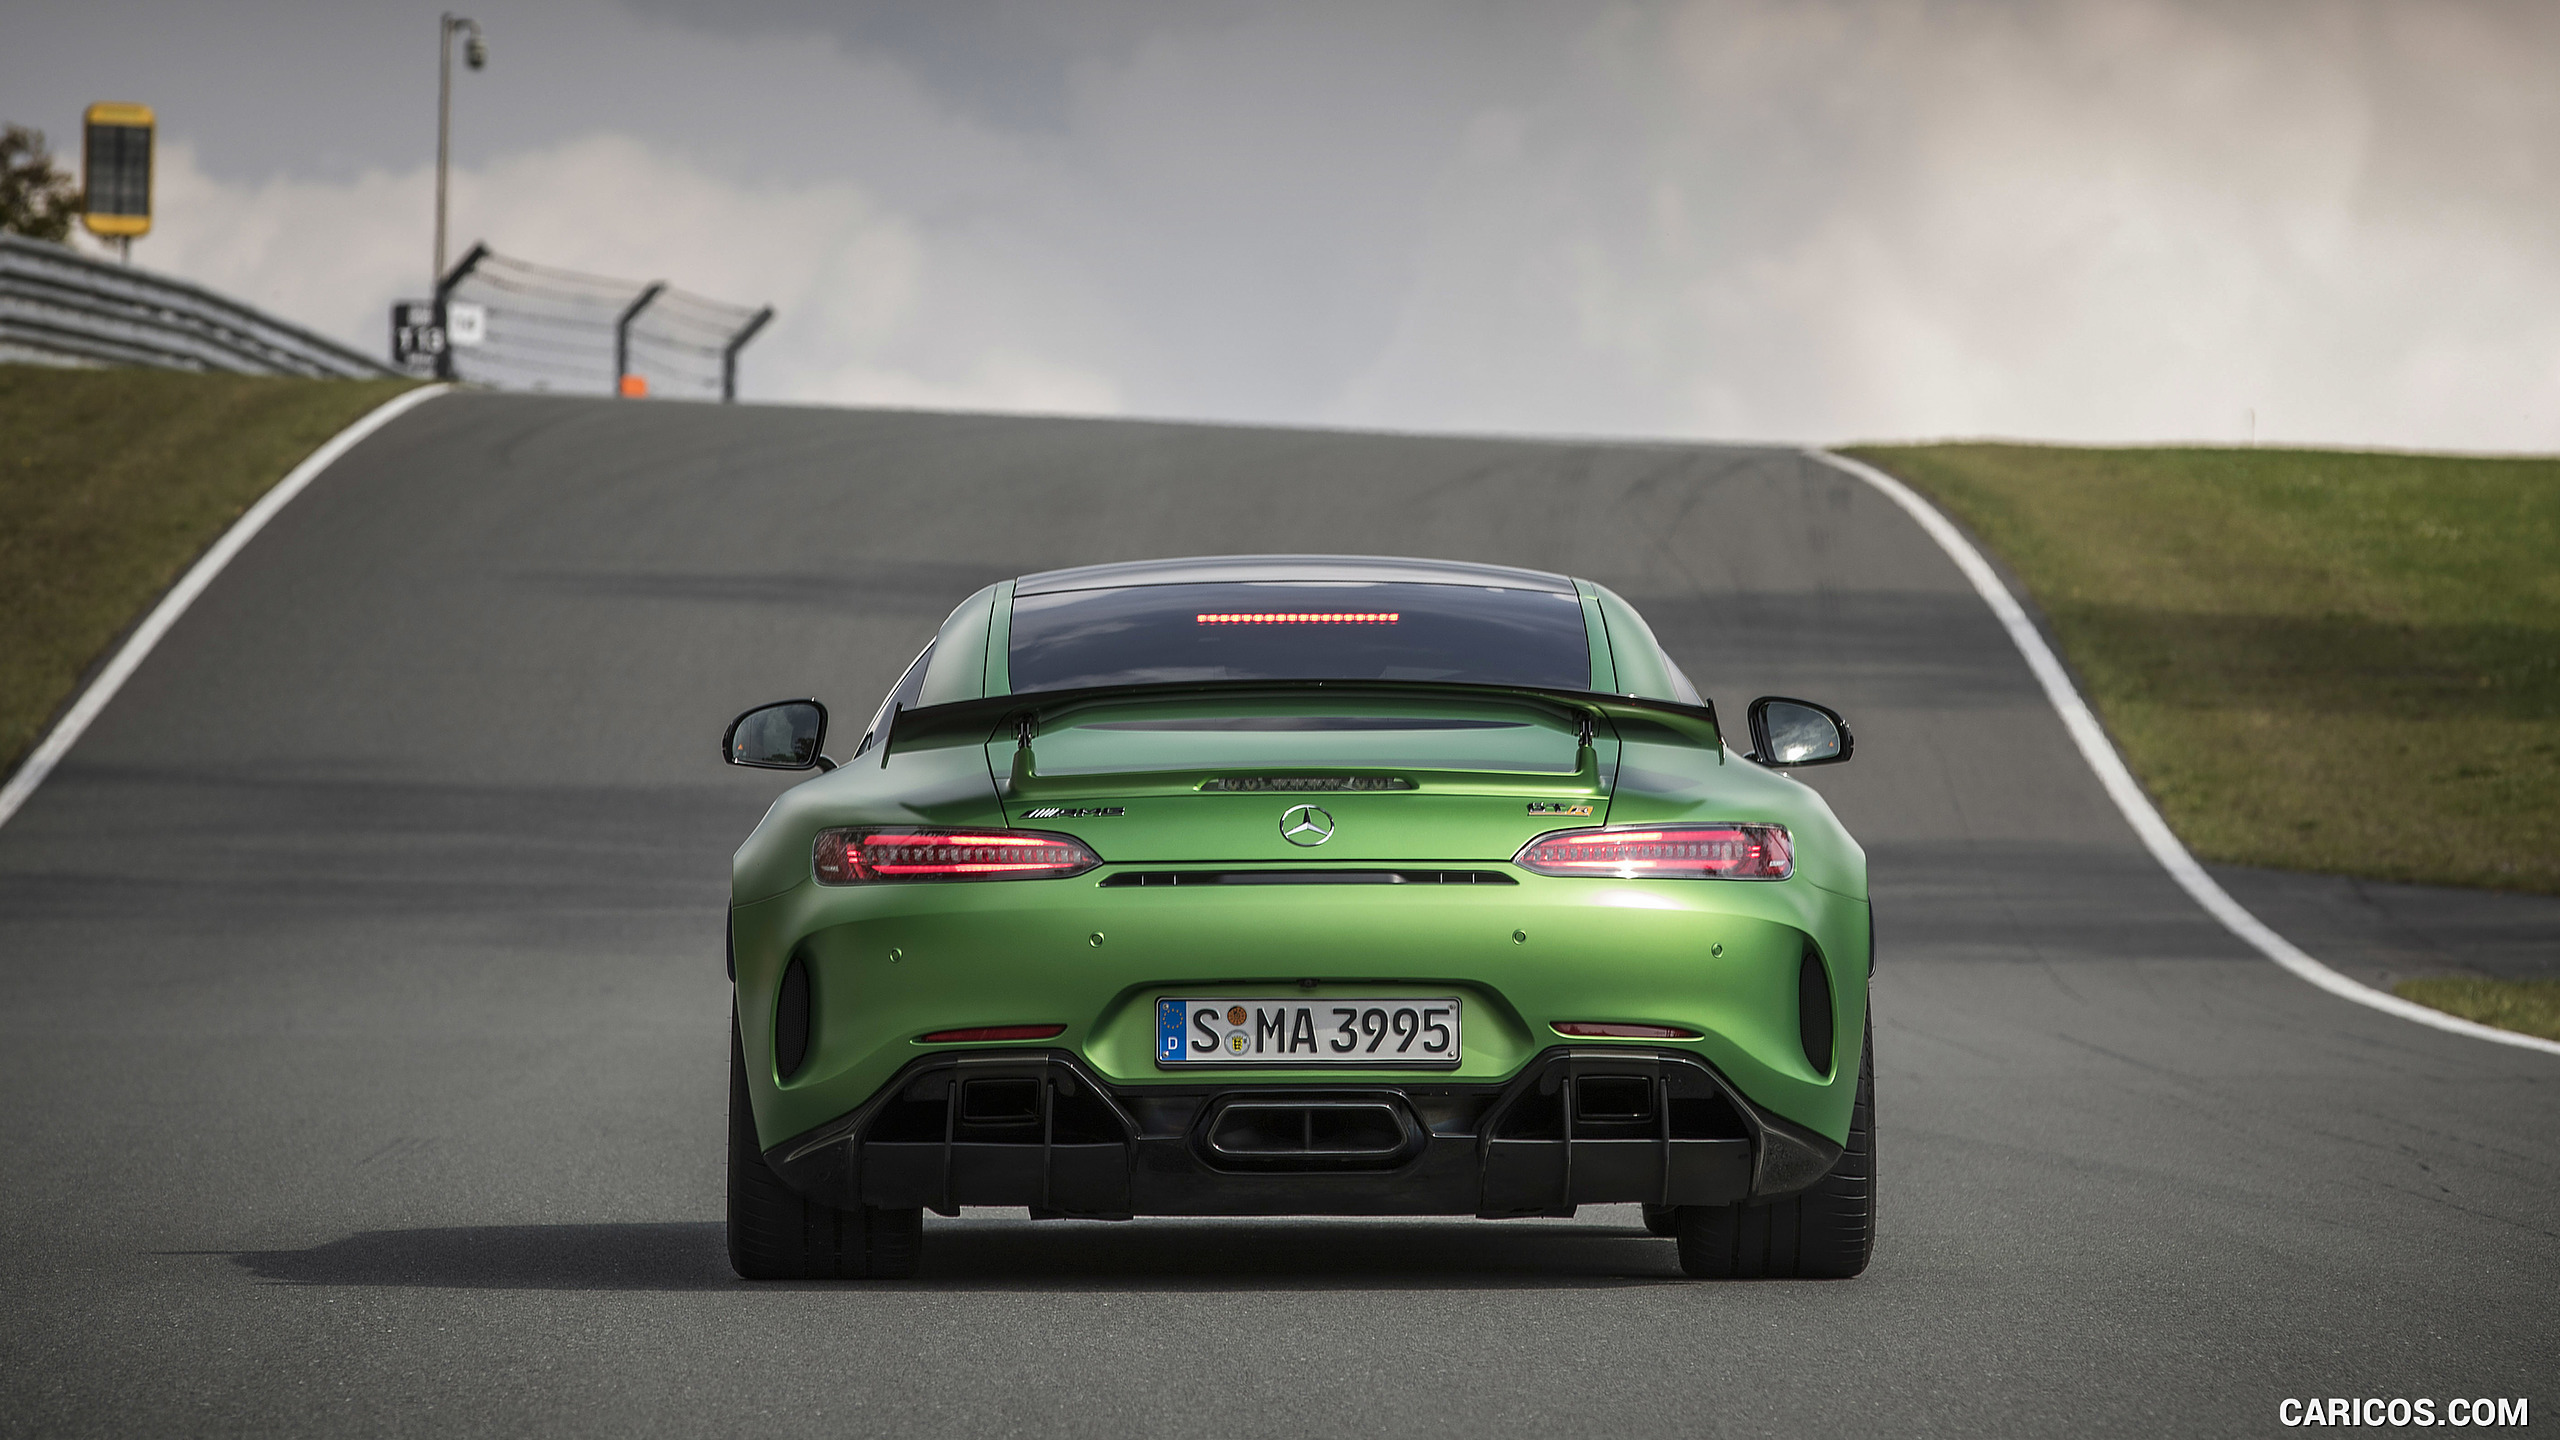 2017 Mercedes-AMG GT R Coupe - Rear, #169 of 182